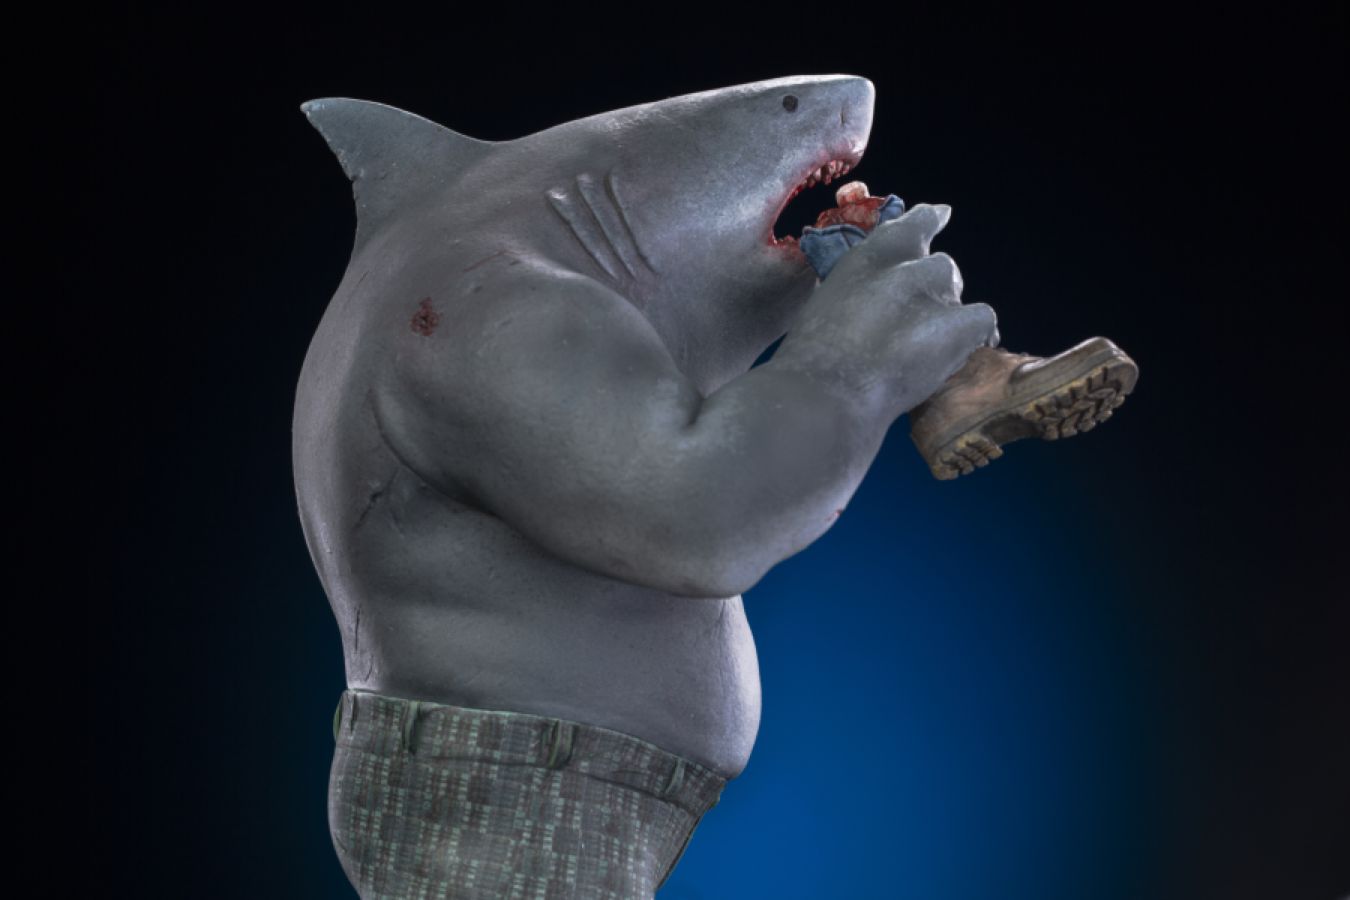 The Suicide Squad - King Shark 1:10 Scale Statue